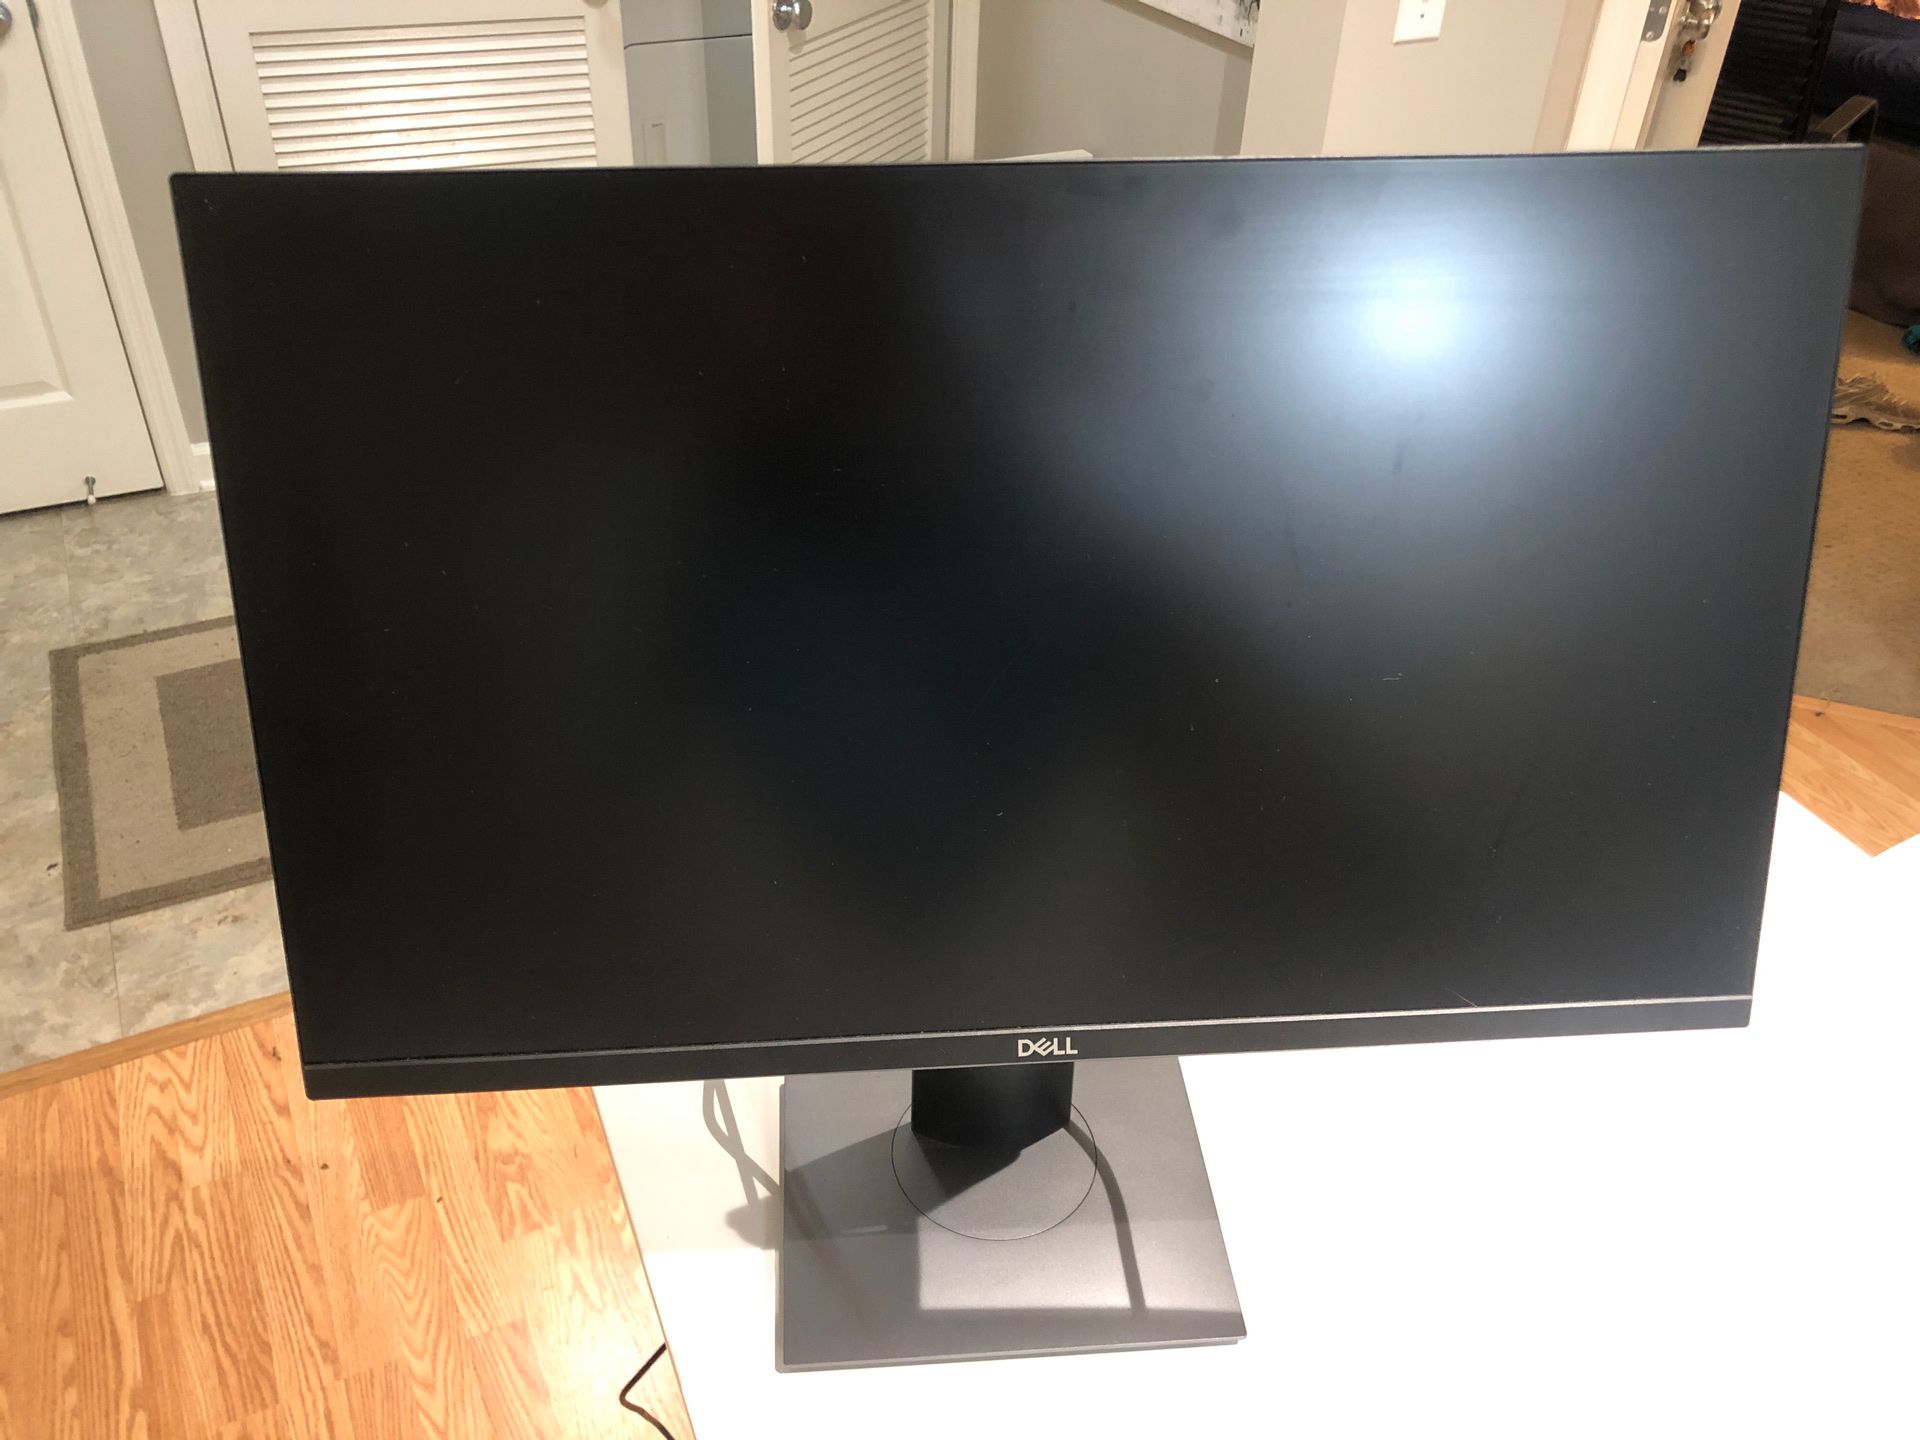 Dell - 24" IPS LED FHD Monitor - Black. W/ USB, HDMI and SSC extension cables